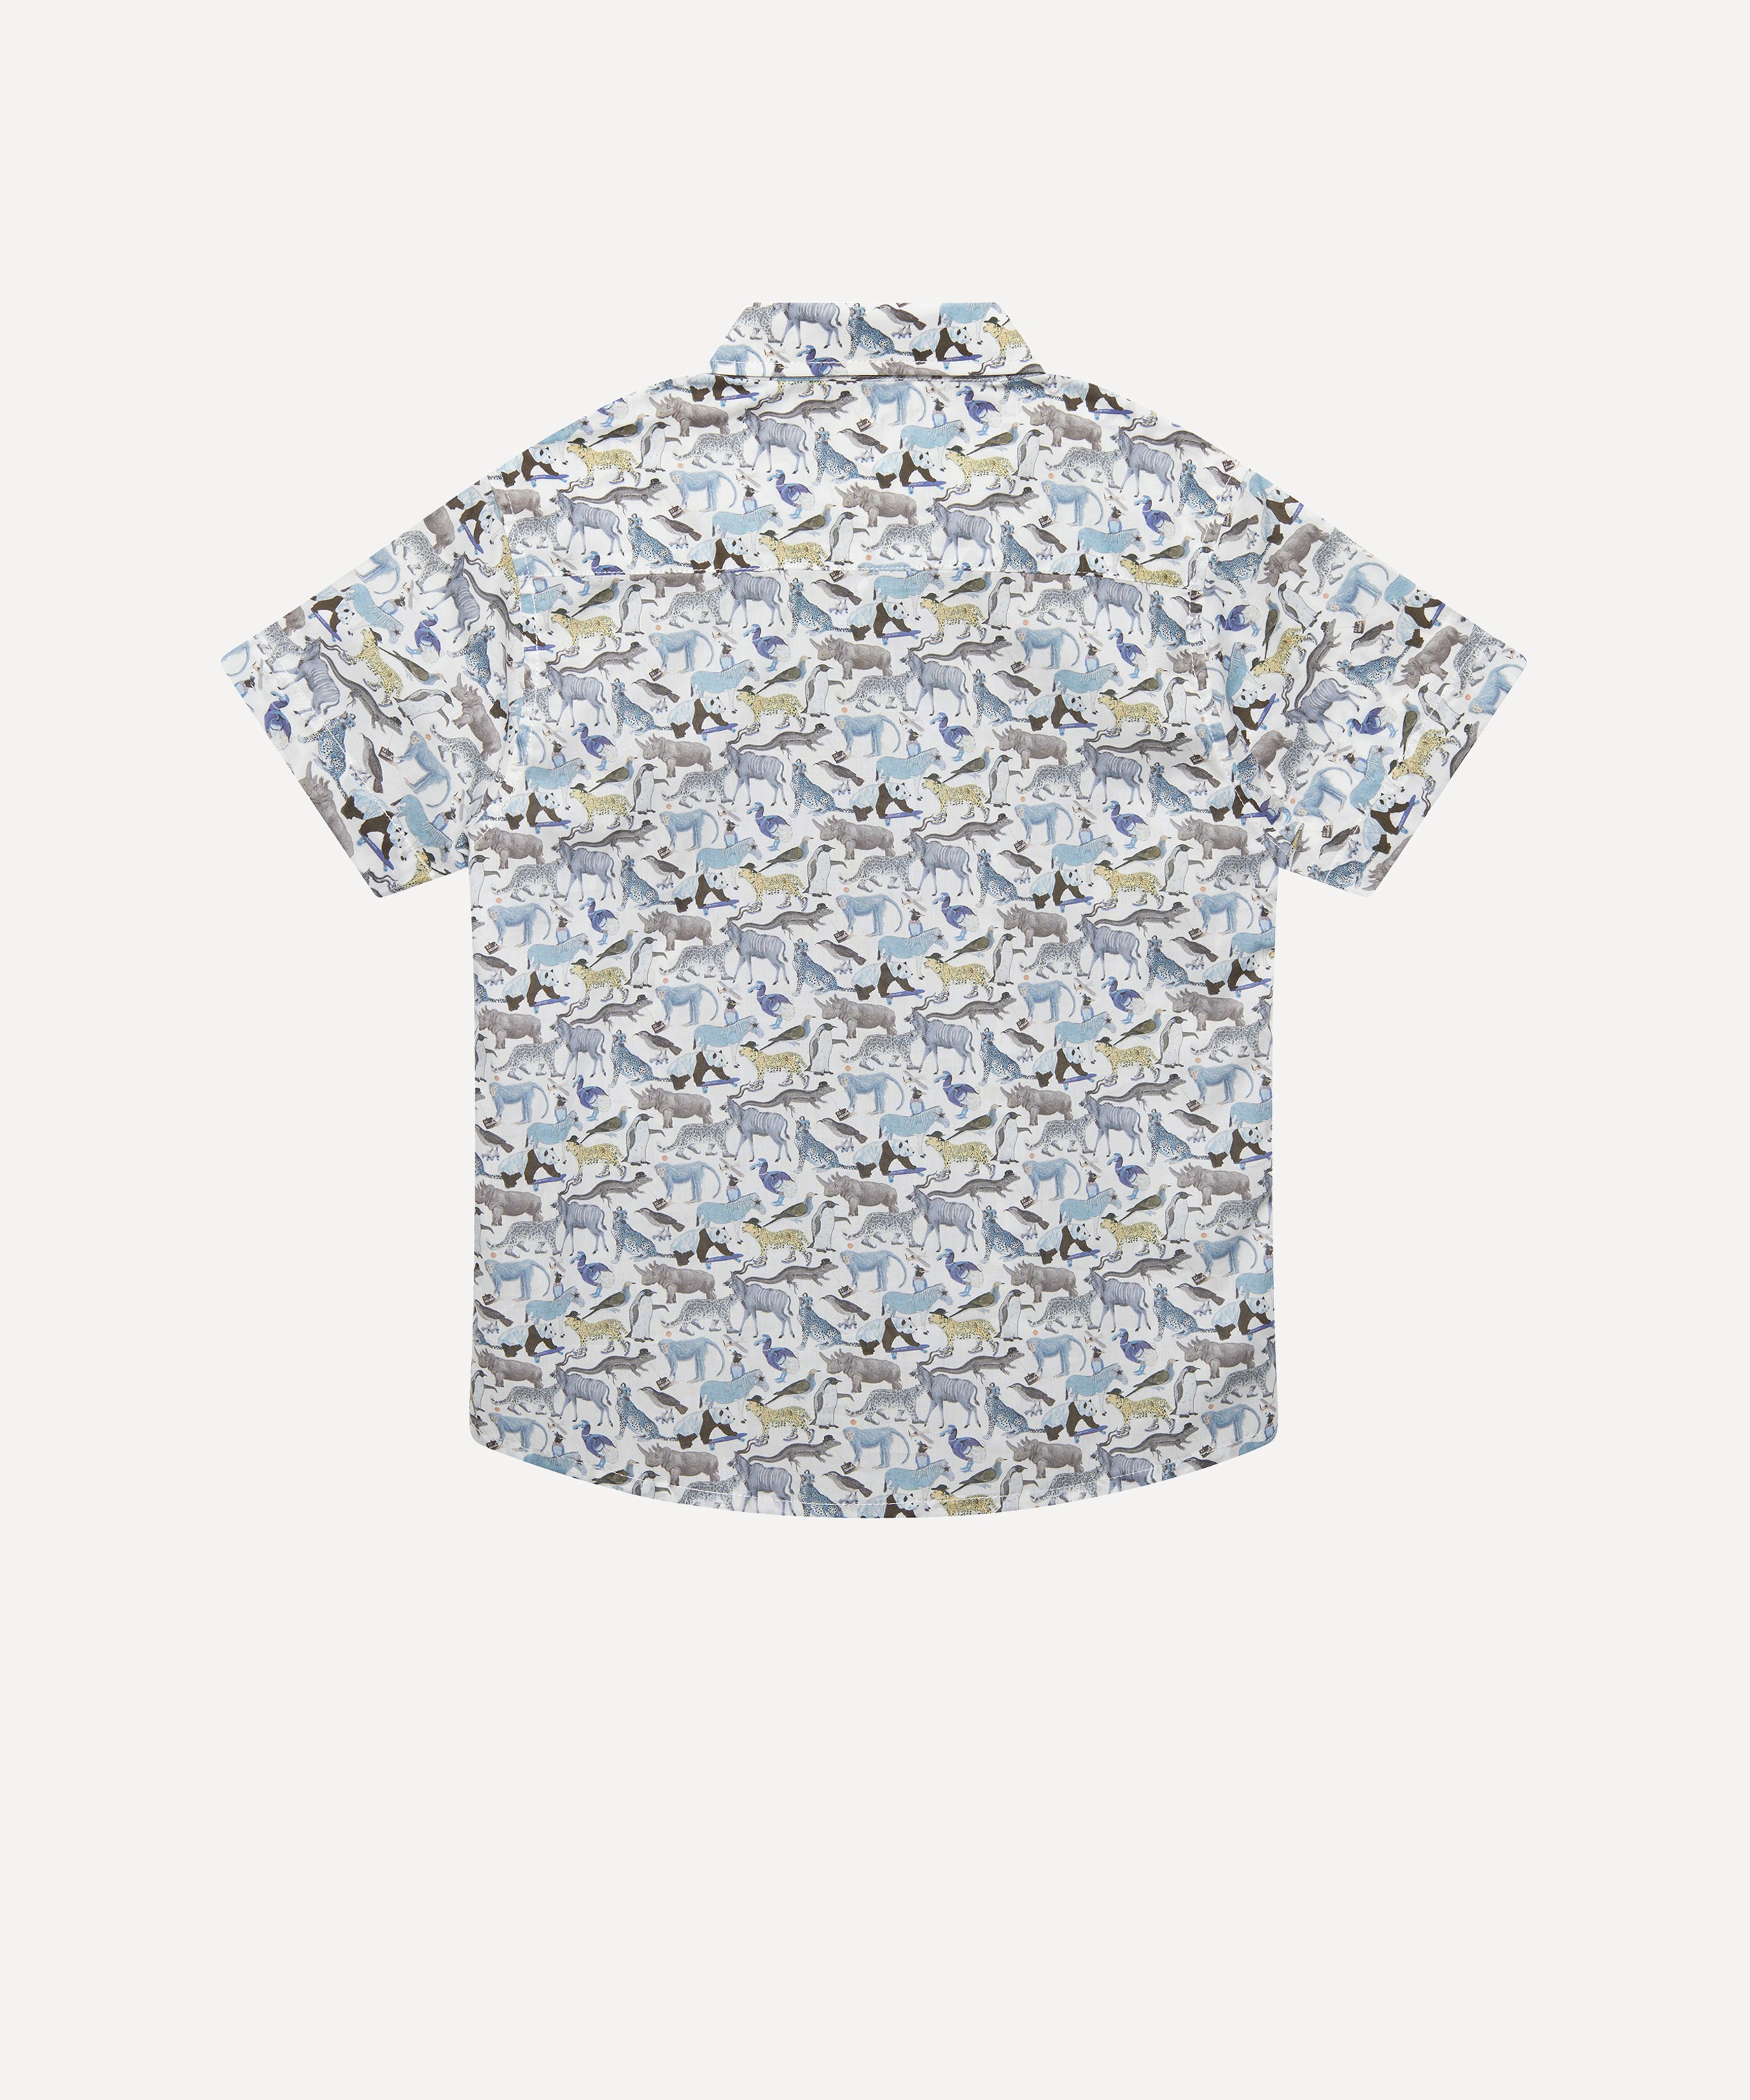 Trotters - Short Sleeve Zoo Shirt 6-11 Years image number 1